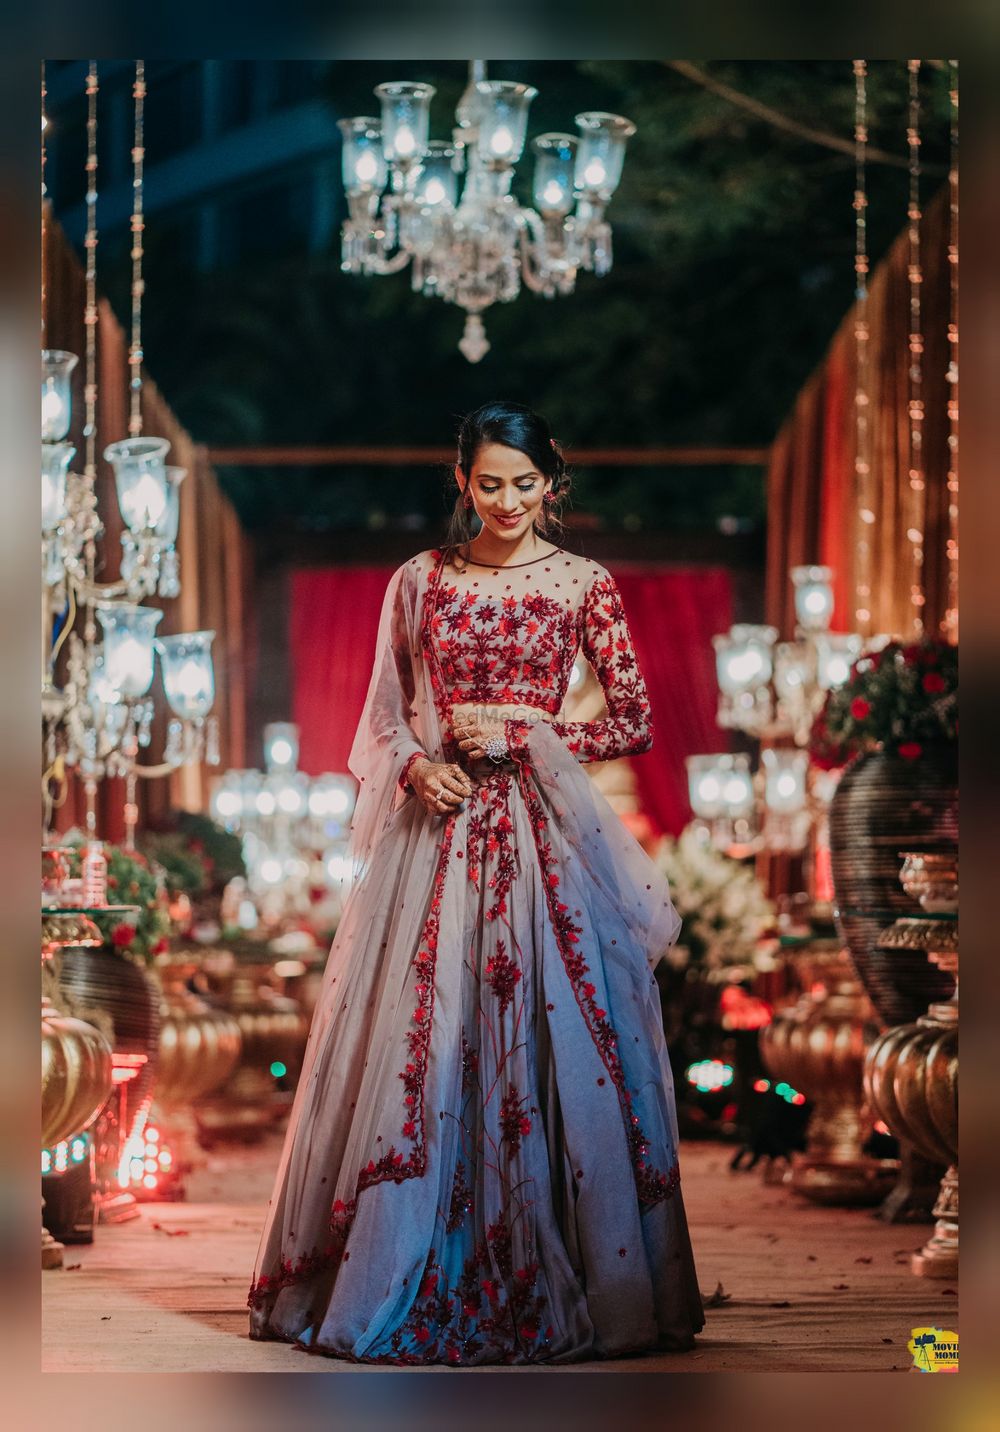 Photo From Our Fairytale Brides - By Chetna Chhadwas Bridal World